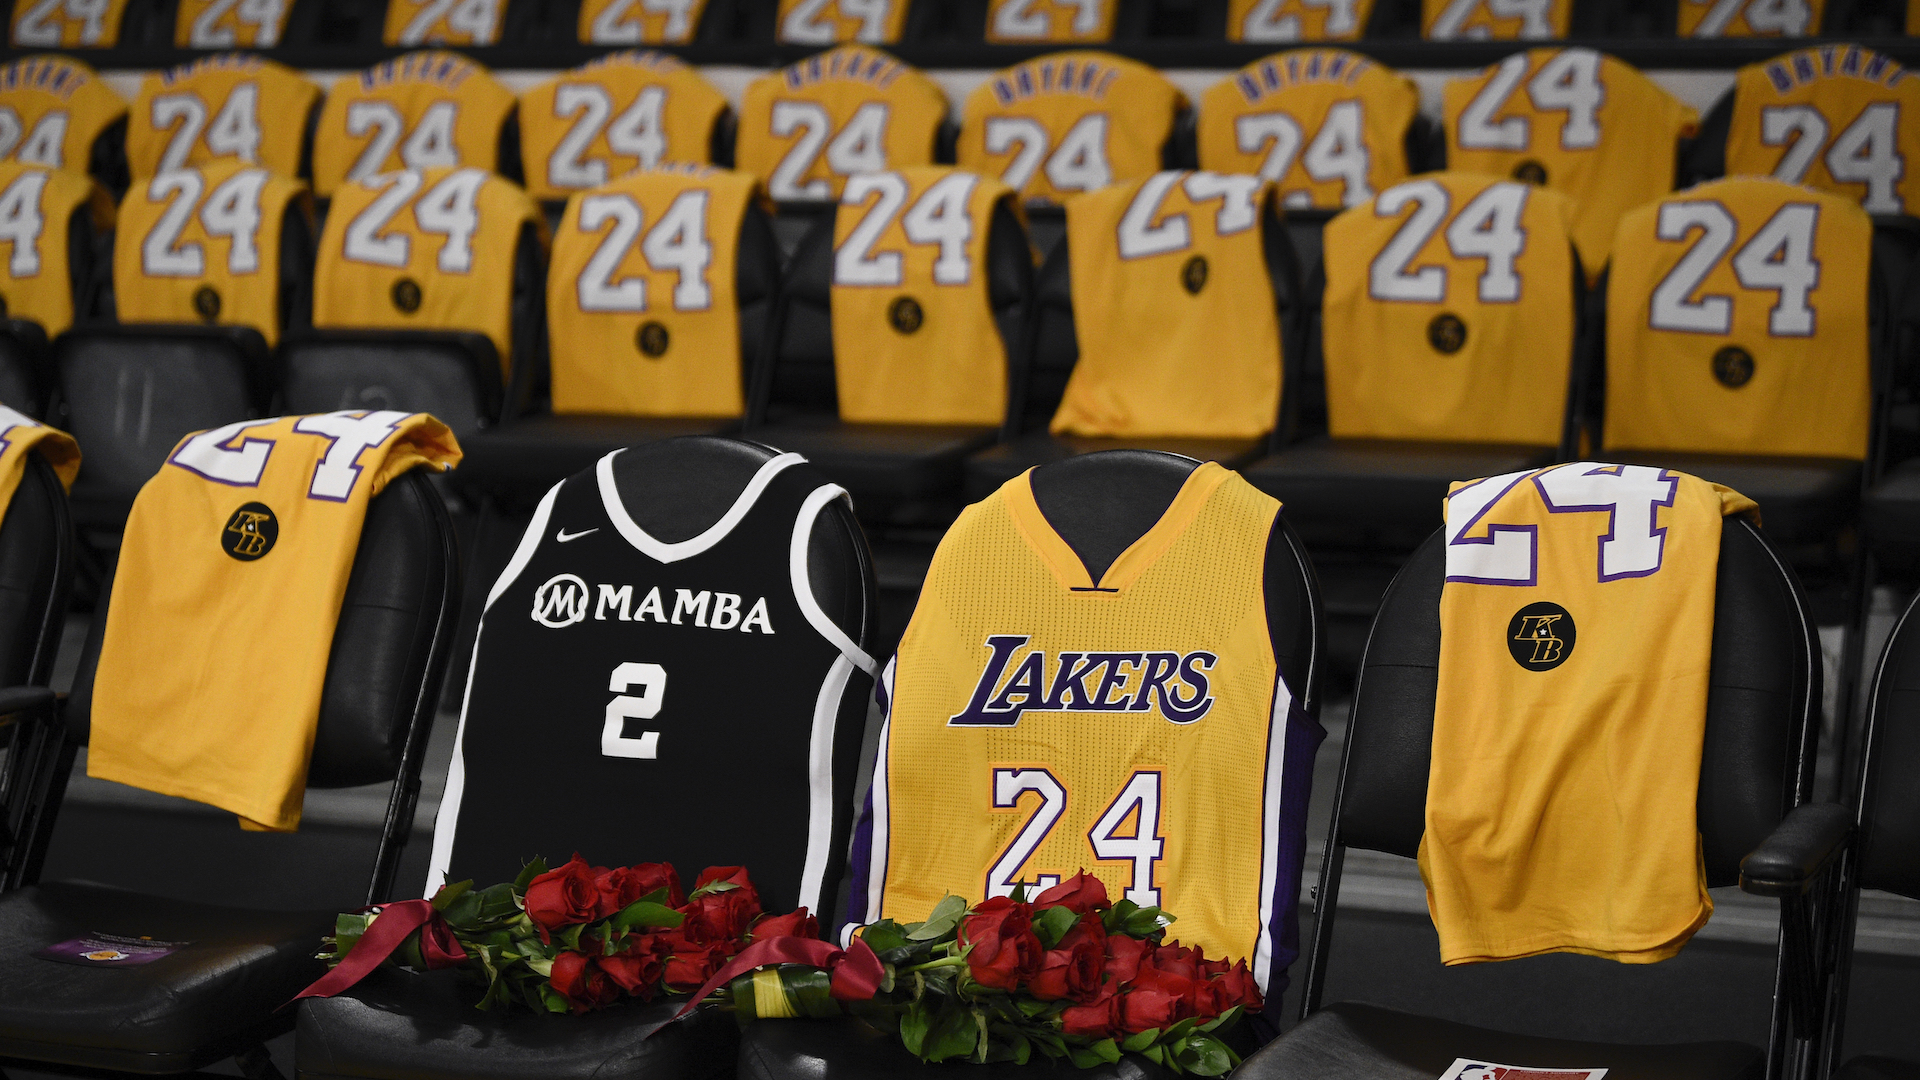 Kobe Bryant Death: Tickets to First Lakers Game Listed at $99,000